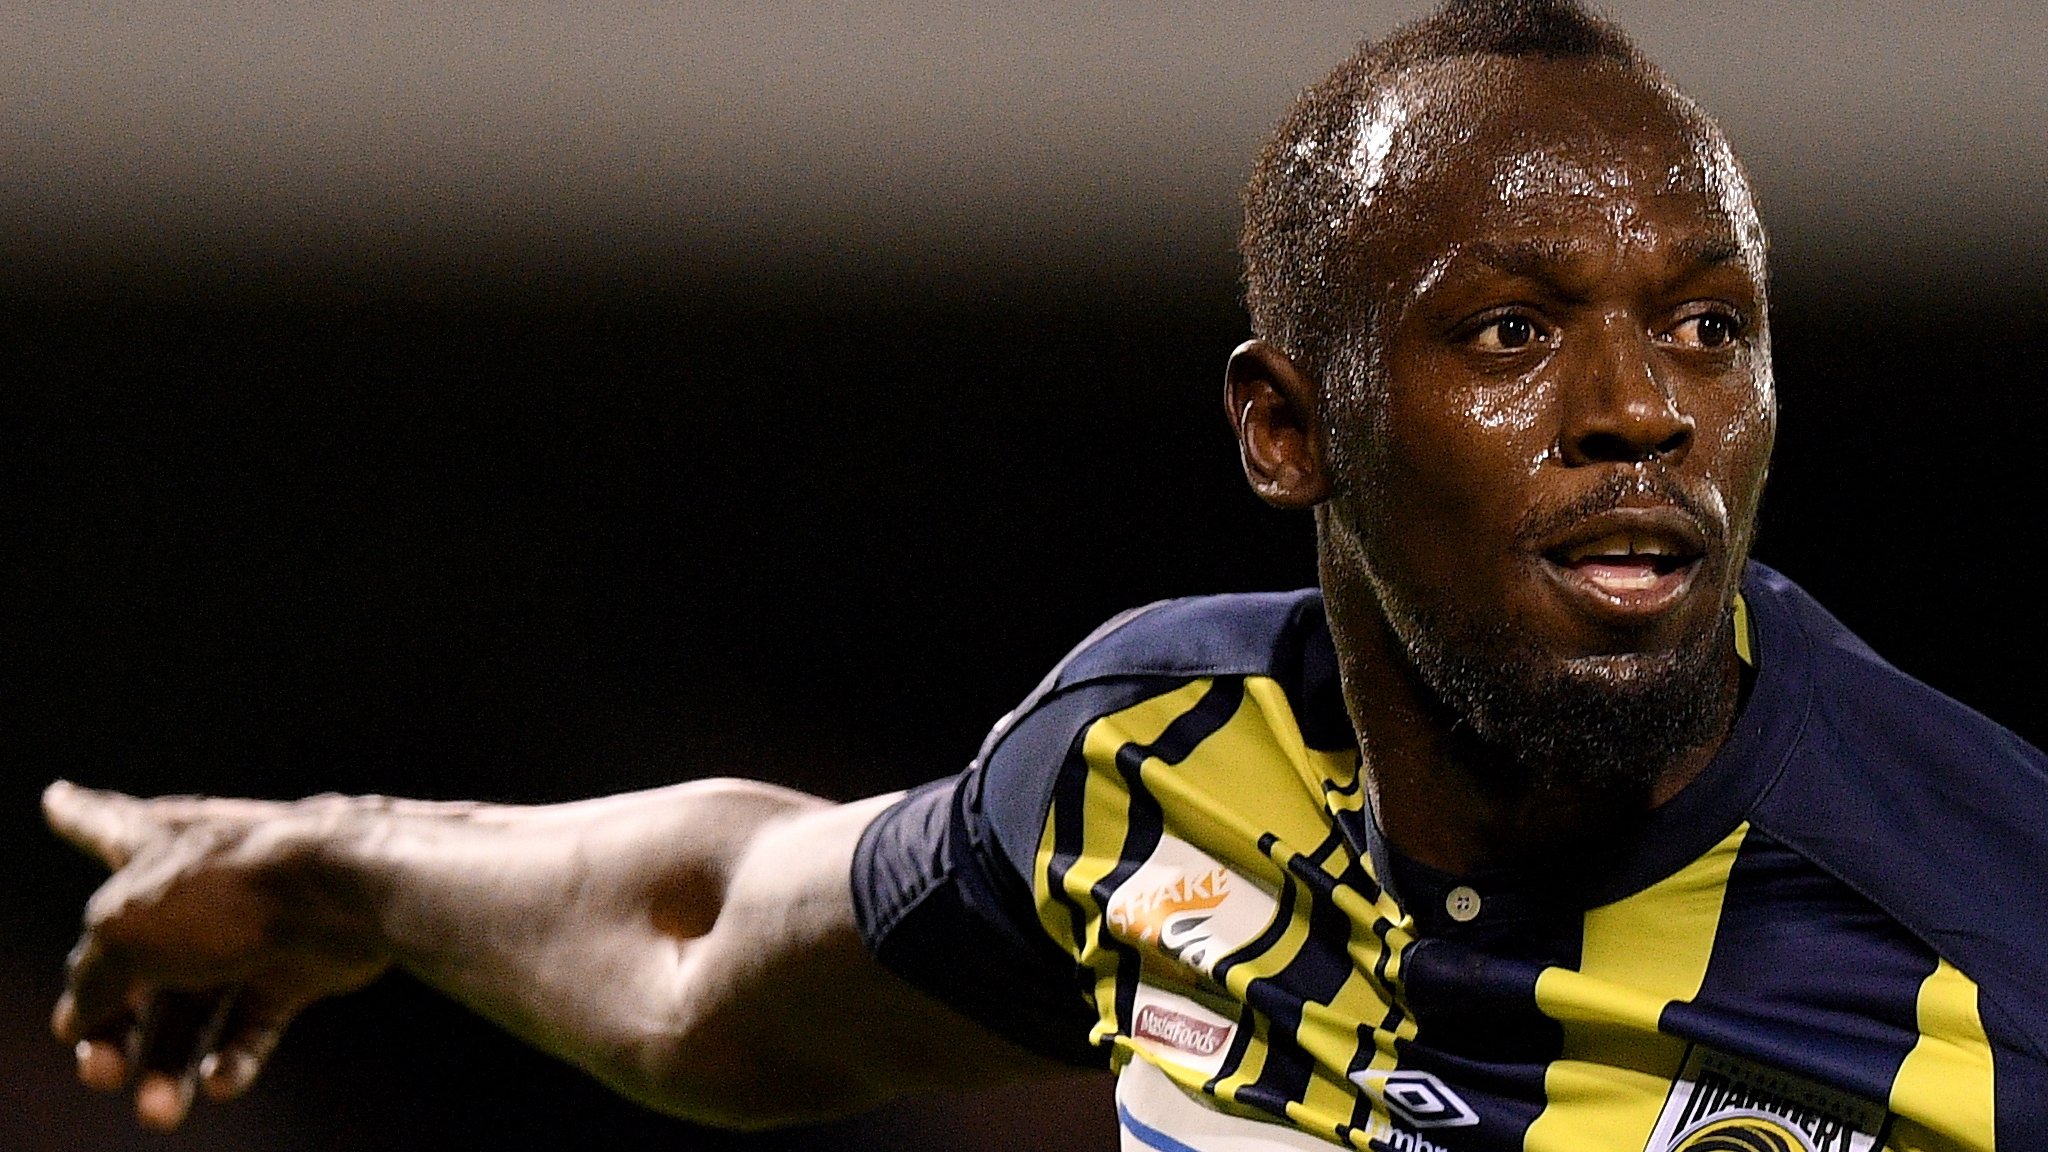 'I'm not even a professional footballer yet' - Bolt questions drugs test notice